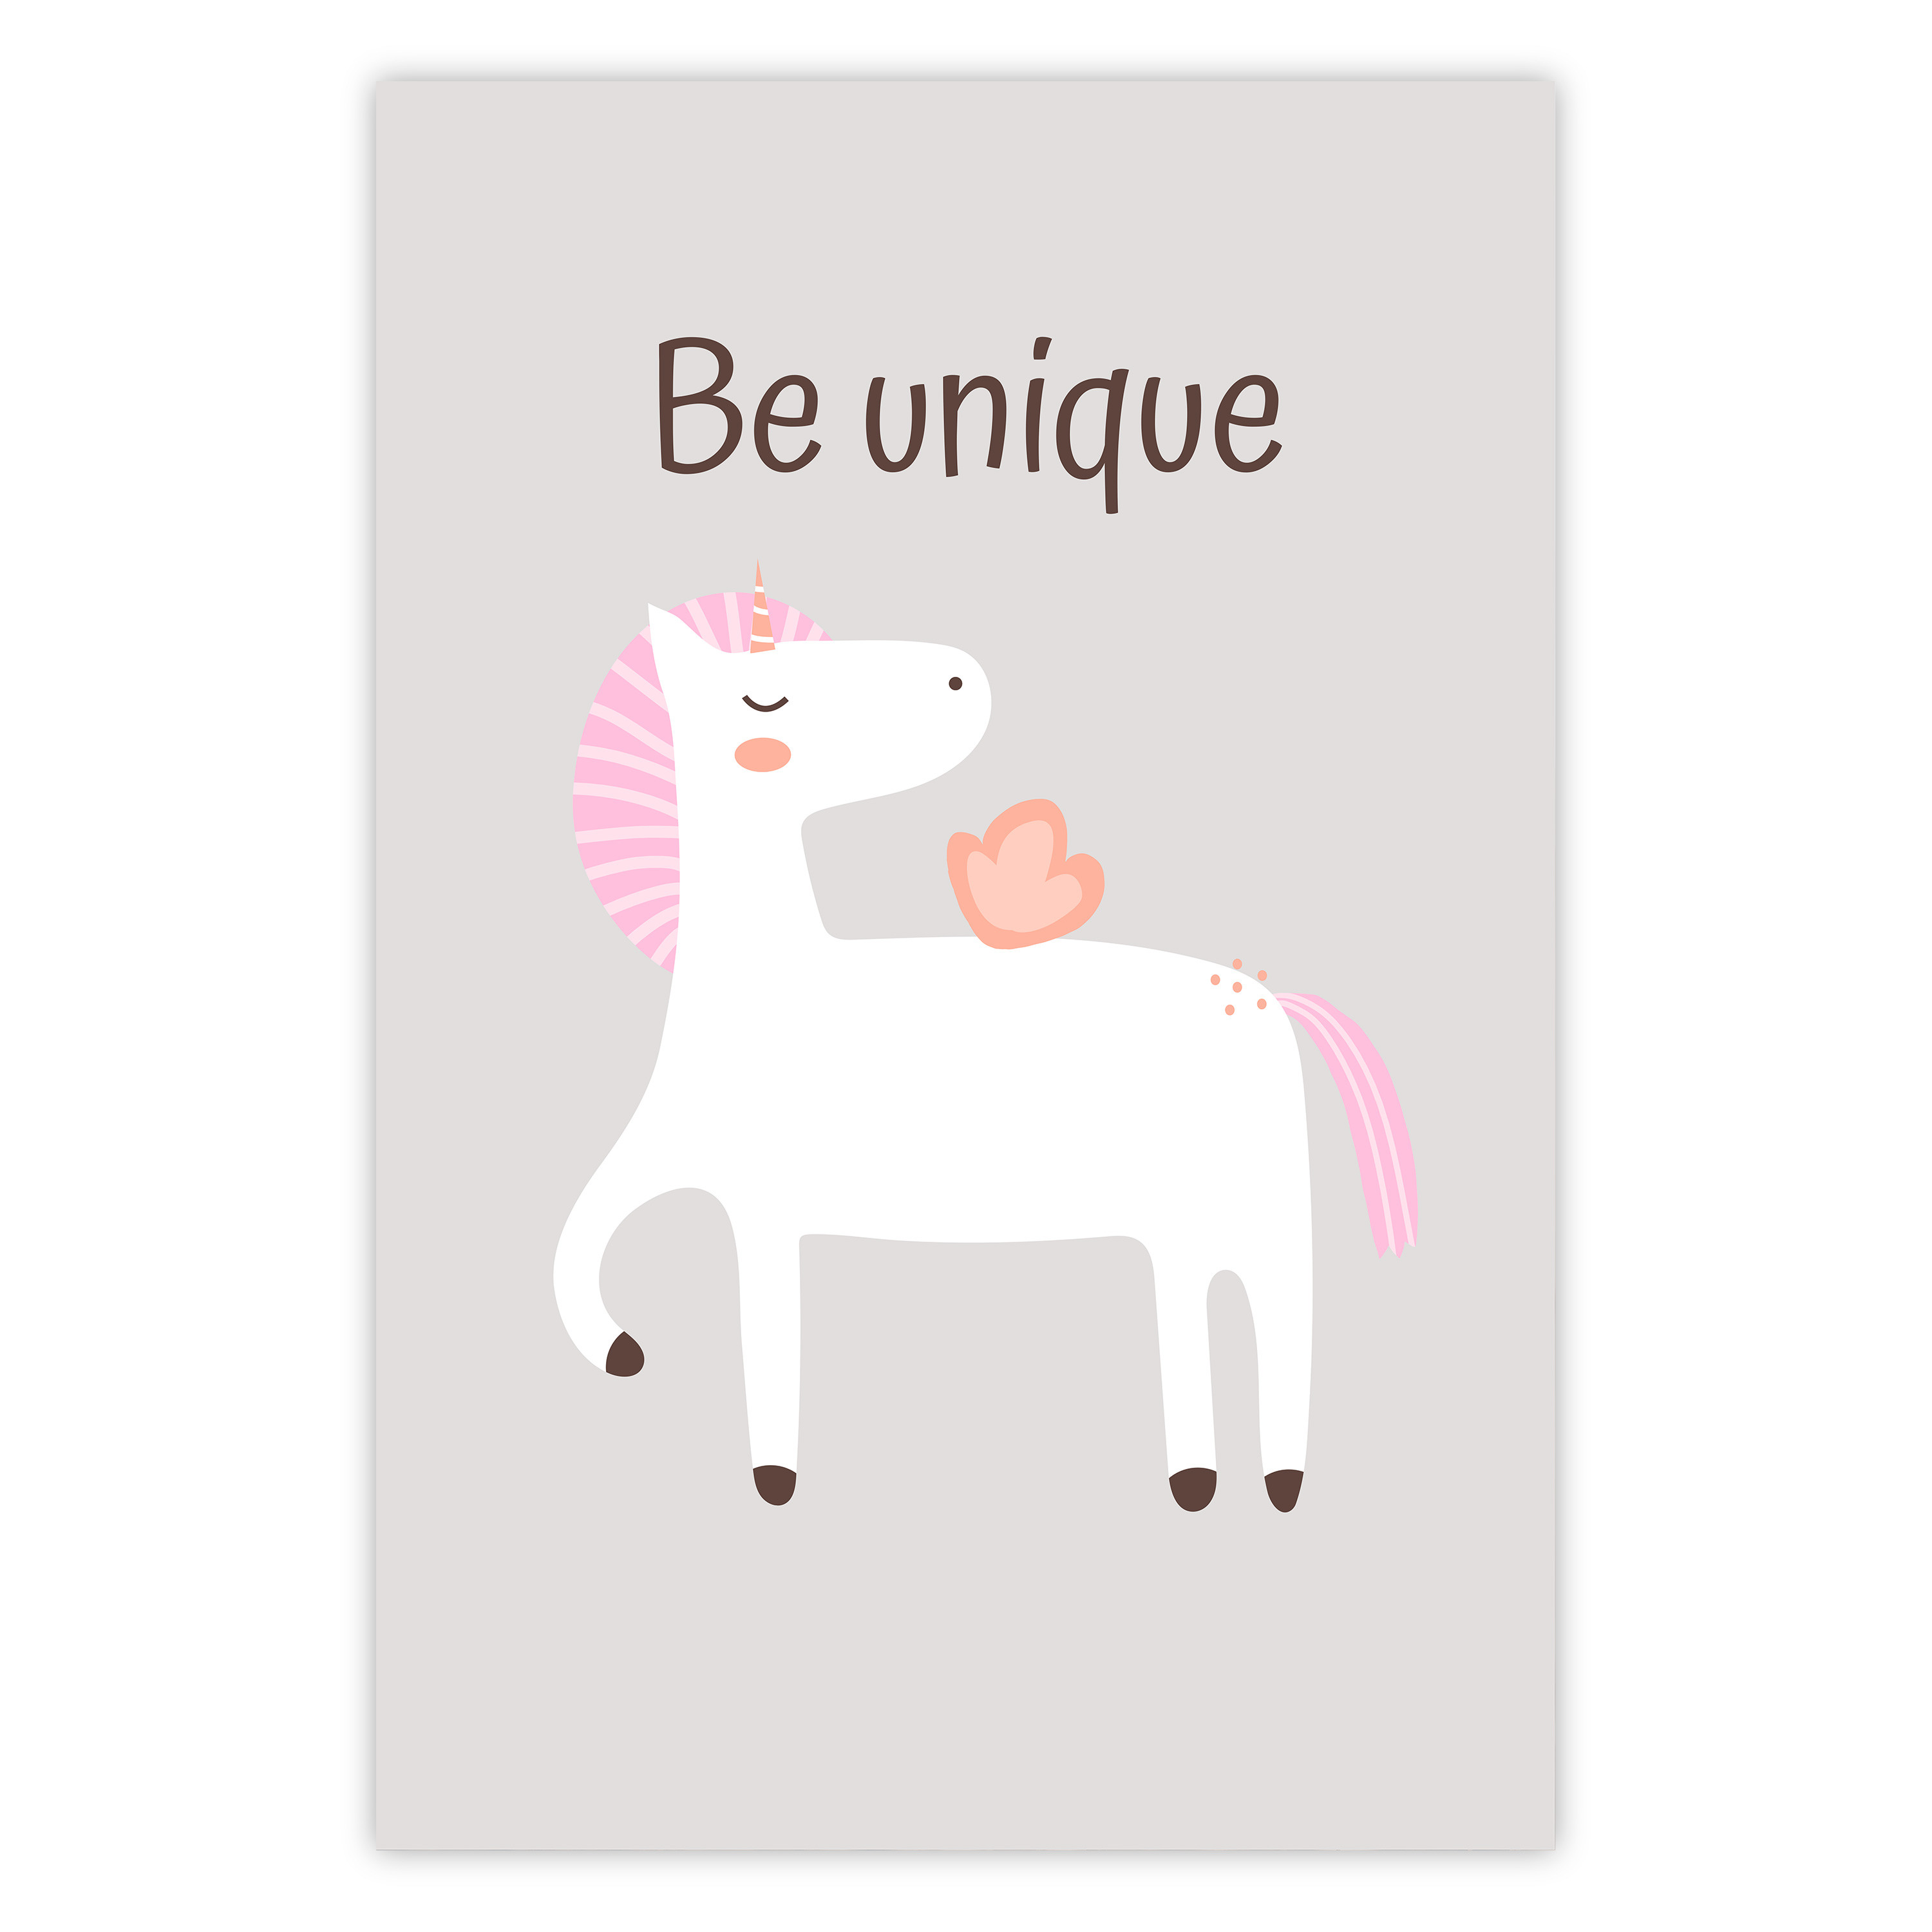 Unique and Unicorn Cheerful Motivating Slogan a Kids Wandposter Poster - Be - for